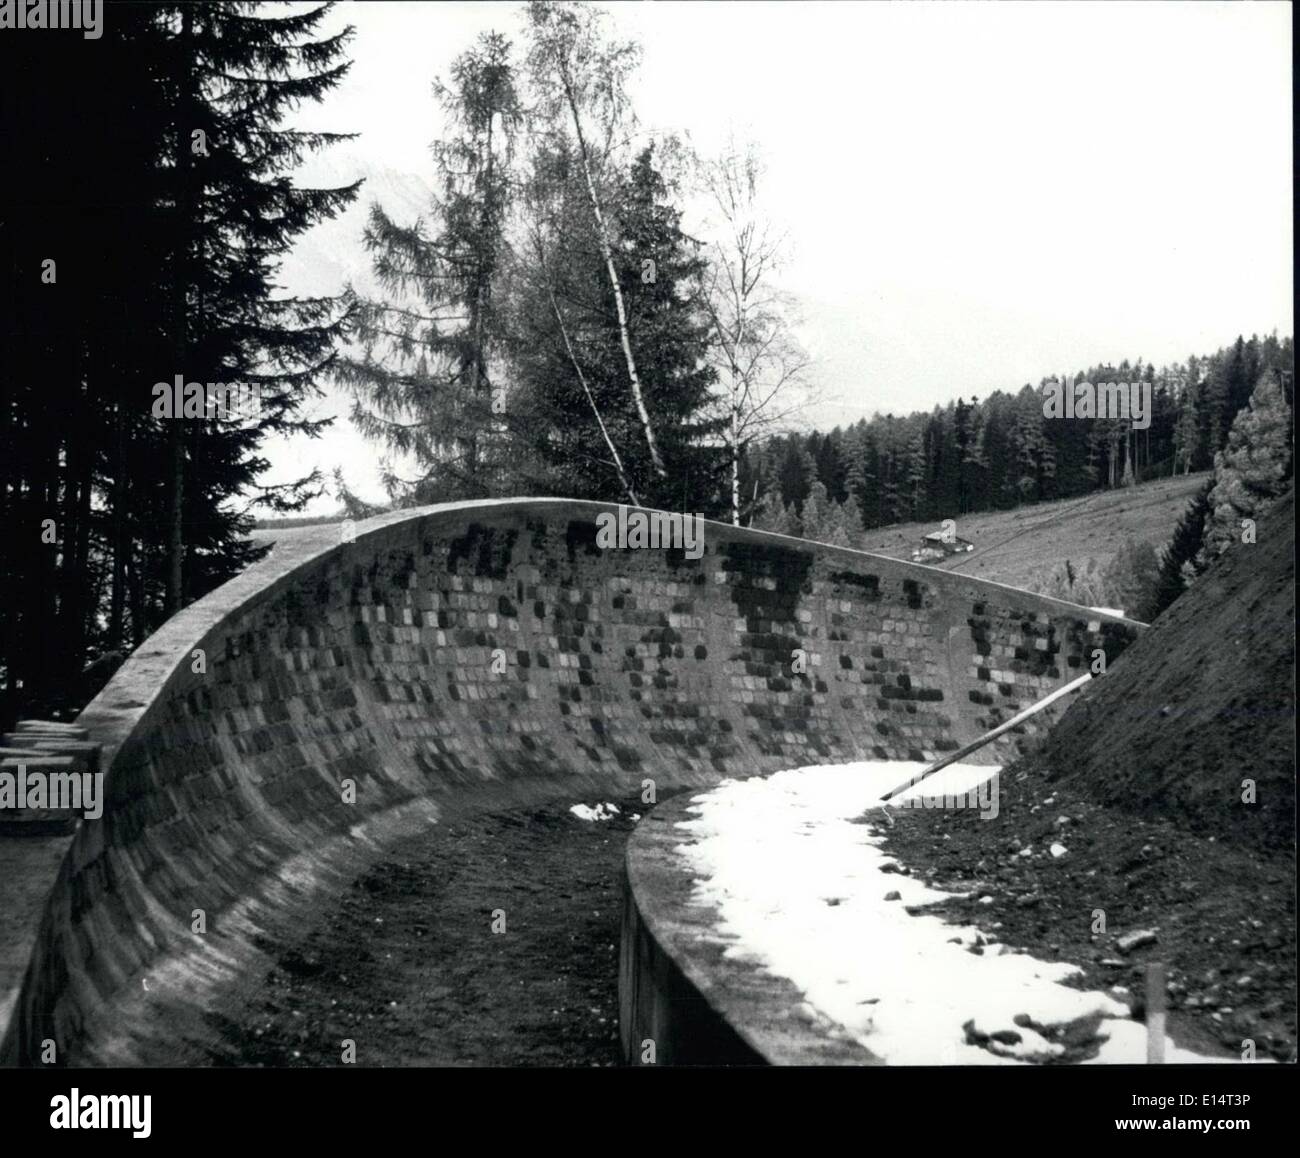 18 avril 2012 - Jeux Olympiques d'hiver 1964 Innsbruck -. Le Bobsleigh Banque D'Images